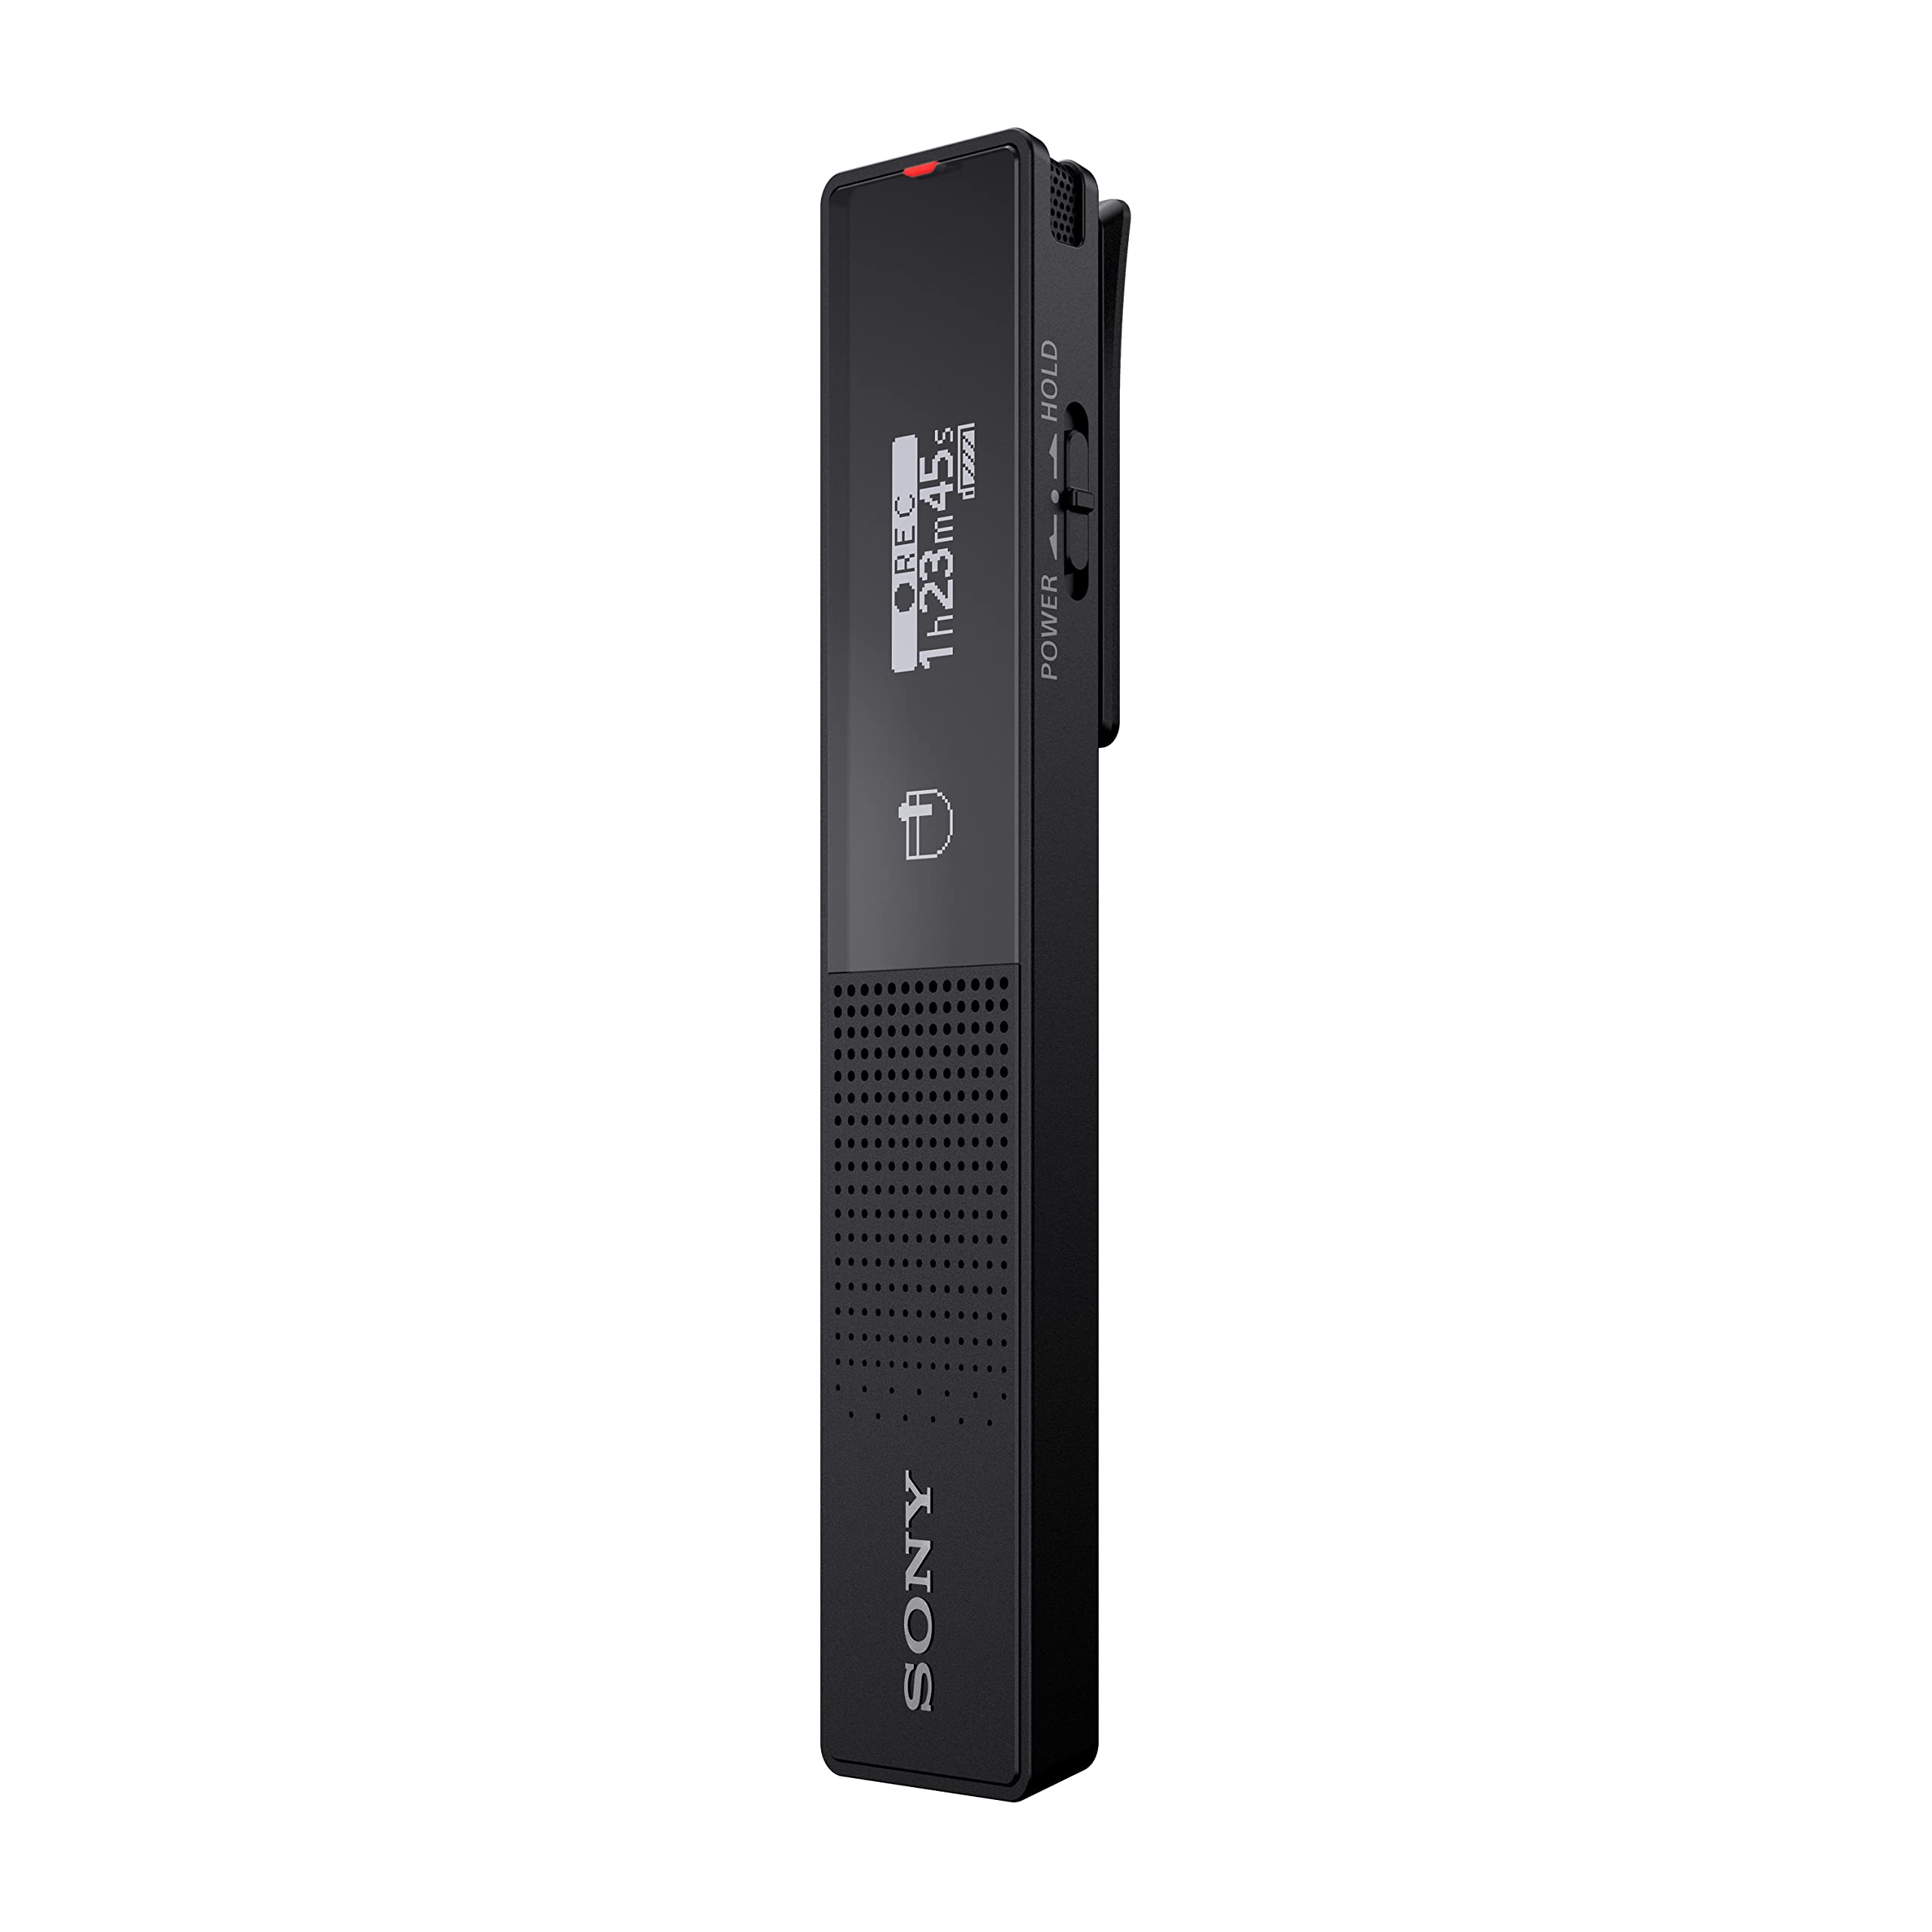 Sony ICD-TX660 - Slim Digital Voice Recorder with OLED Display,Black